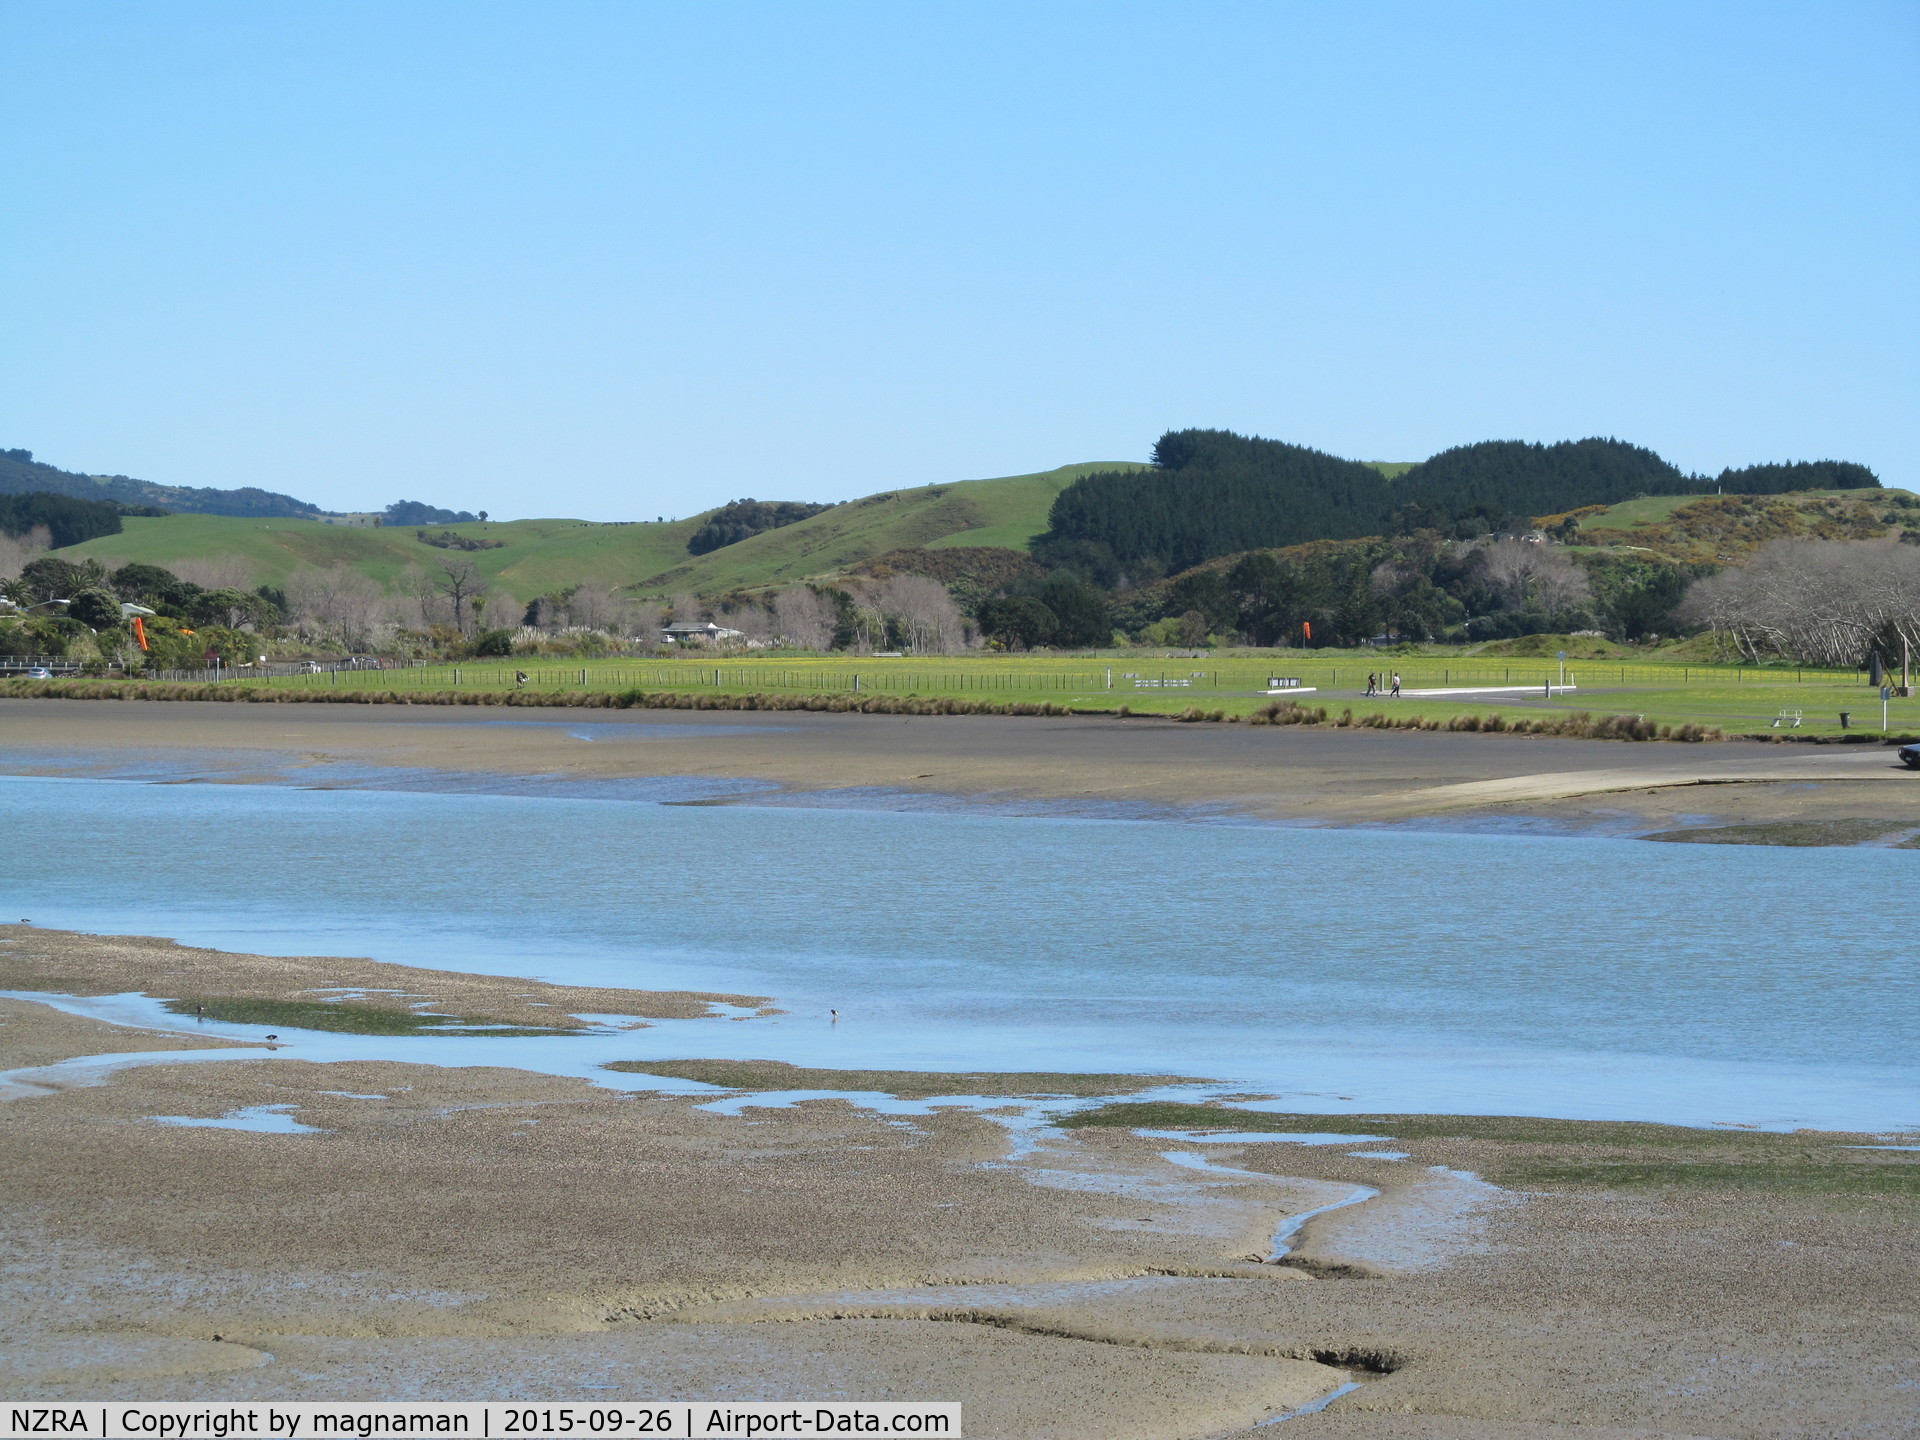 Raglan Aerodrome Airport, Raglan New Zealand (NZRA) - View from across river. A grass strip. No based aircraft but gets regular visitors in summer. Annual fly in very popular. Public footpath crosses runway and easy for photos and parking available next to fence.